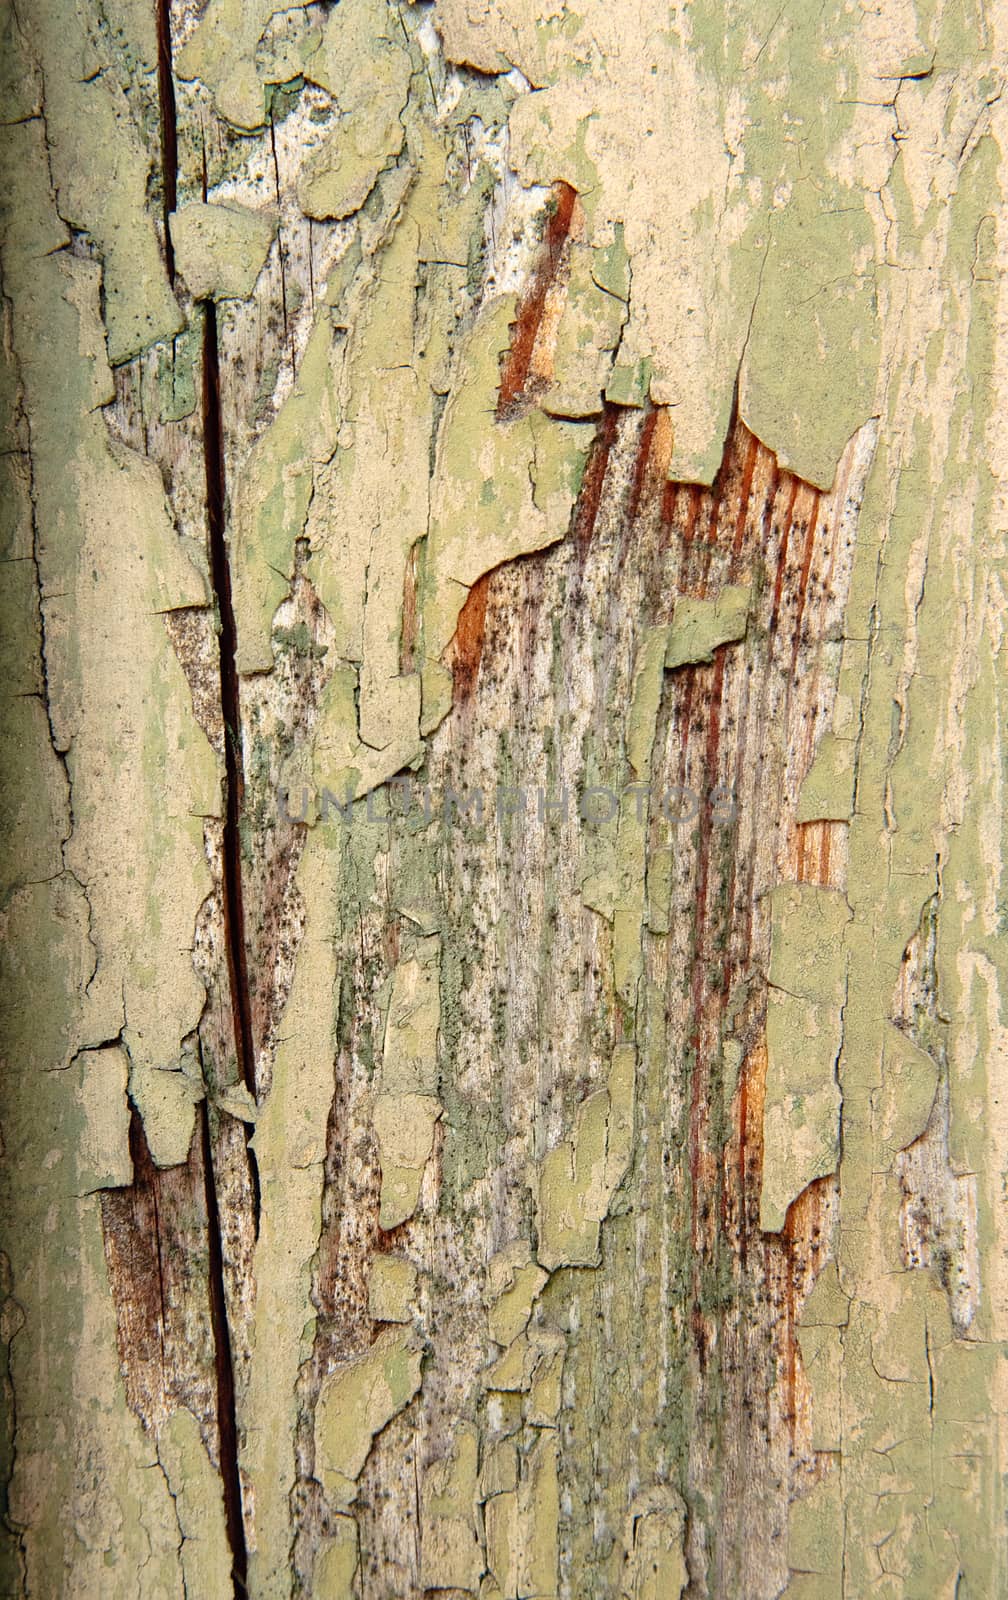 Weathered old painted wood by mrakor